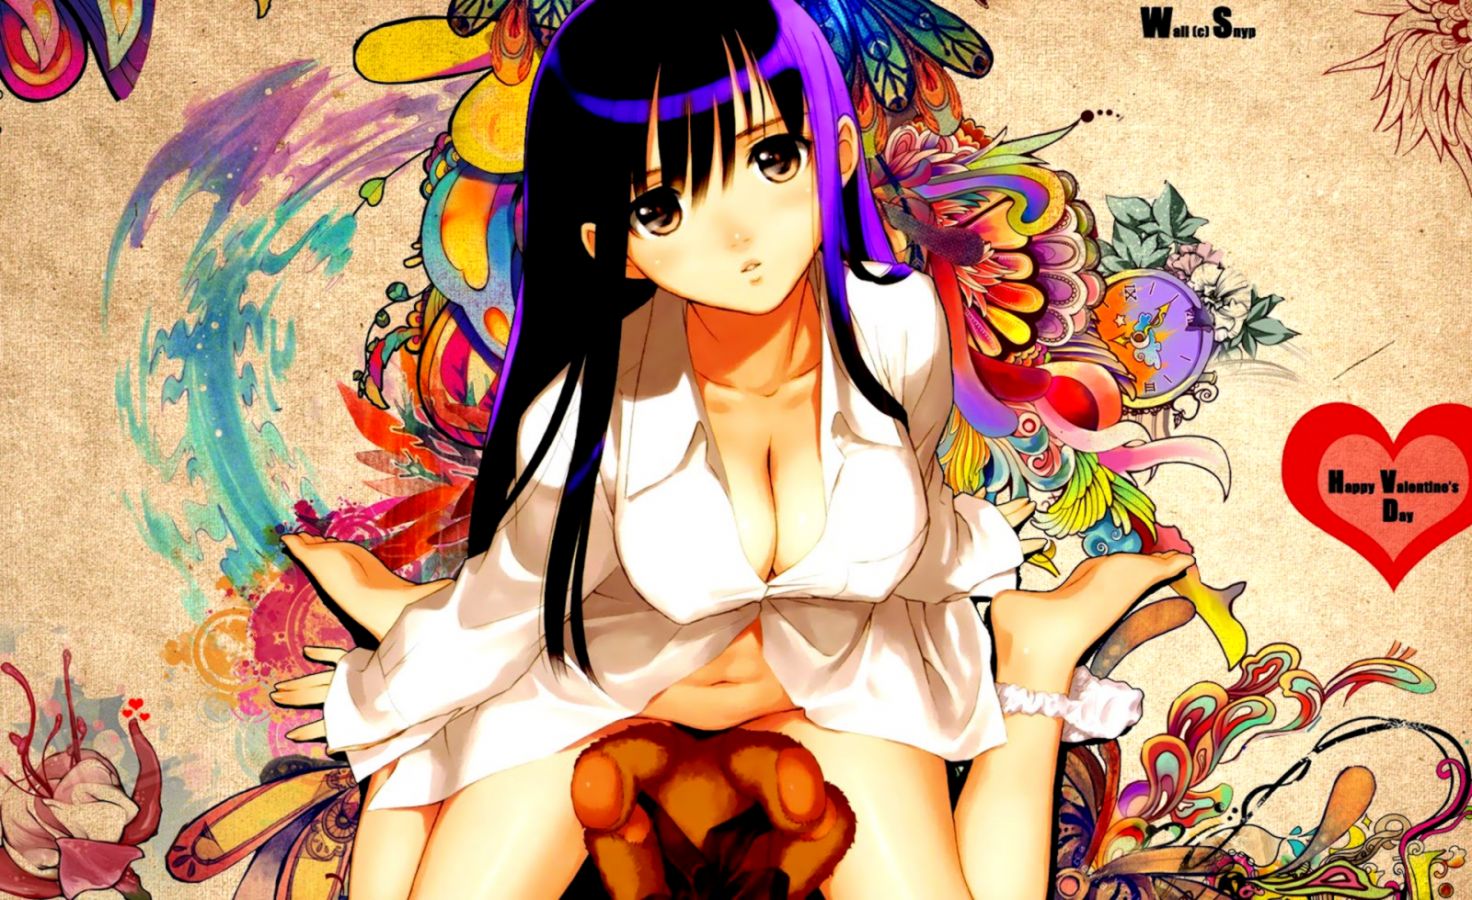  Anime  Wallpaper  Widescreen  All HD  Wallpapers  Gallery